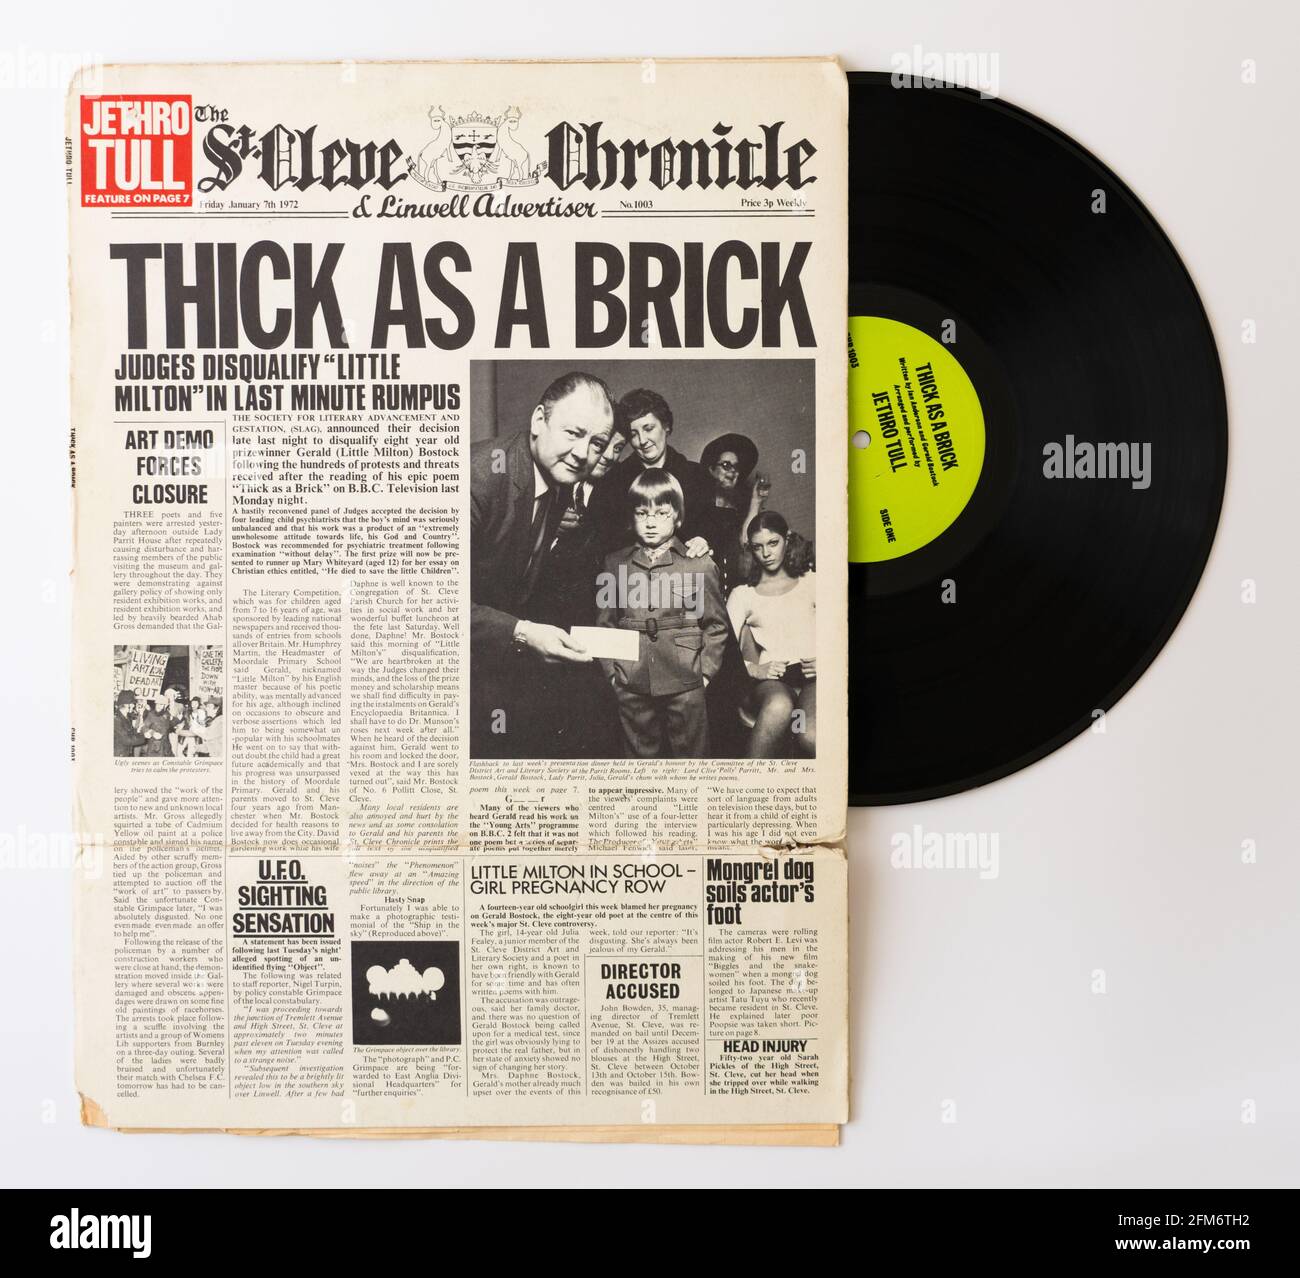 Jethro Tull album - Thick as a Brick - concept album with fold out newspaper sleeve Stock Photo